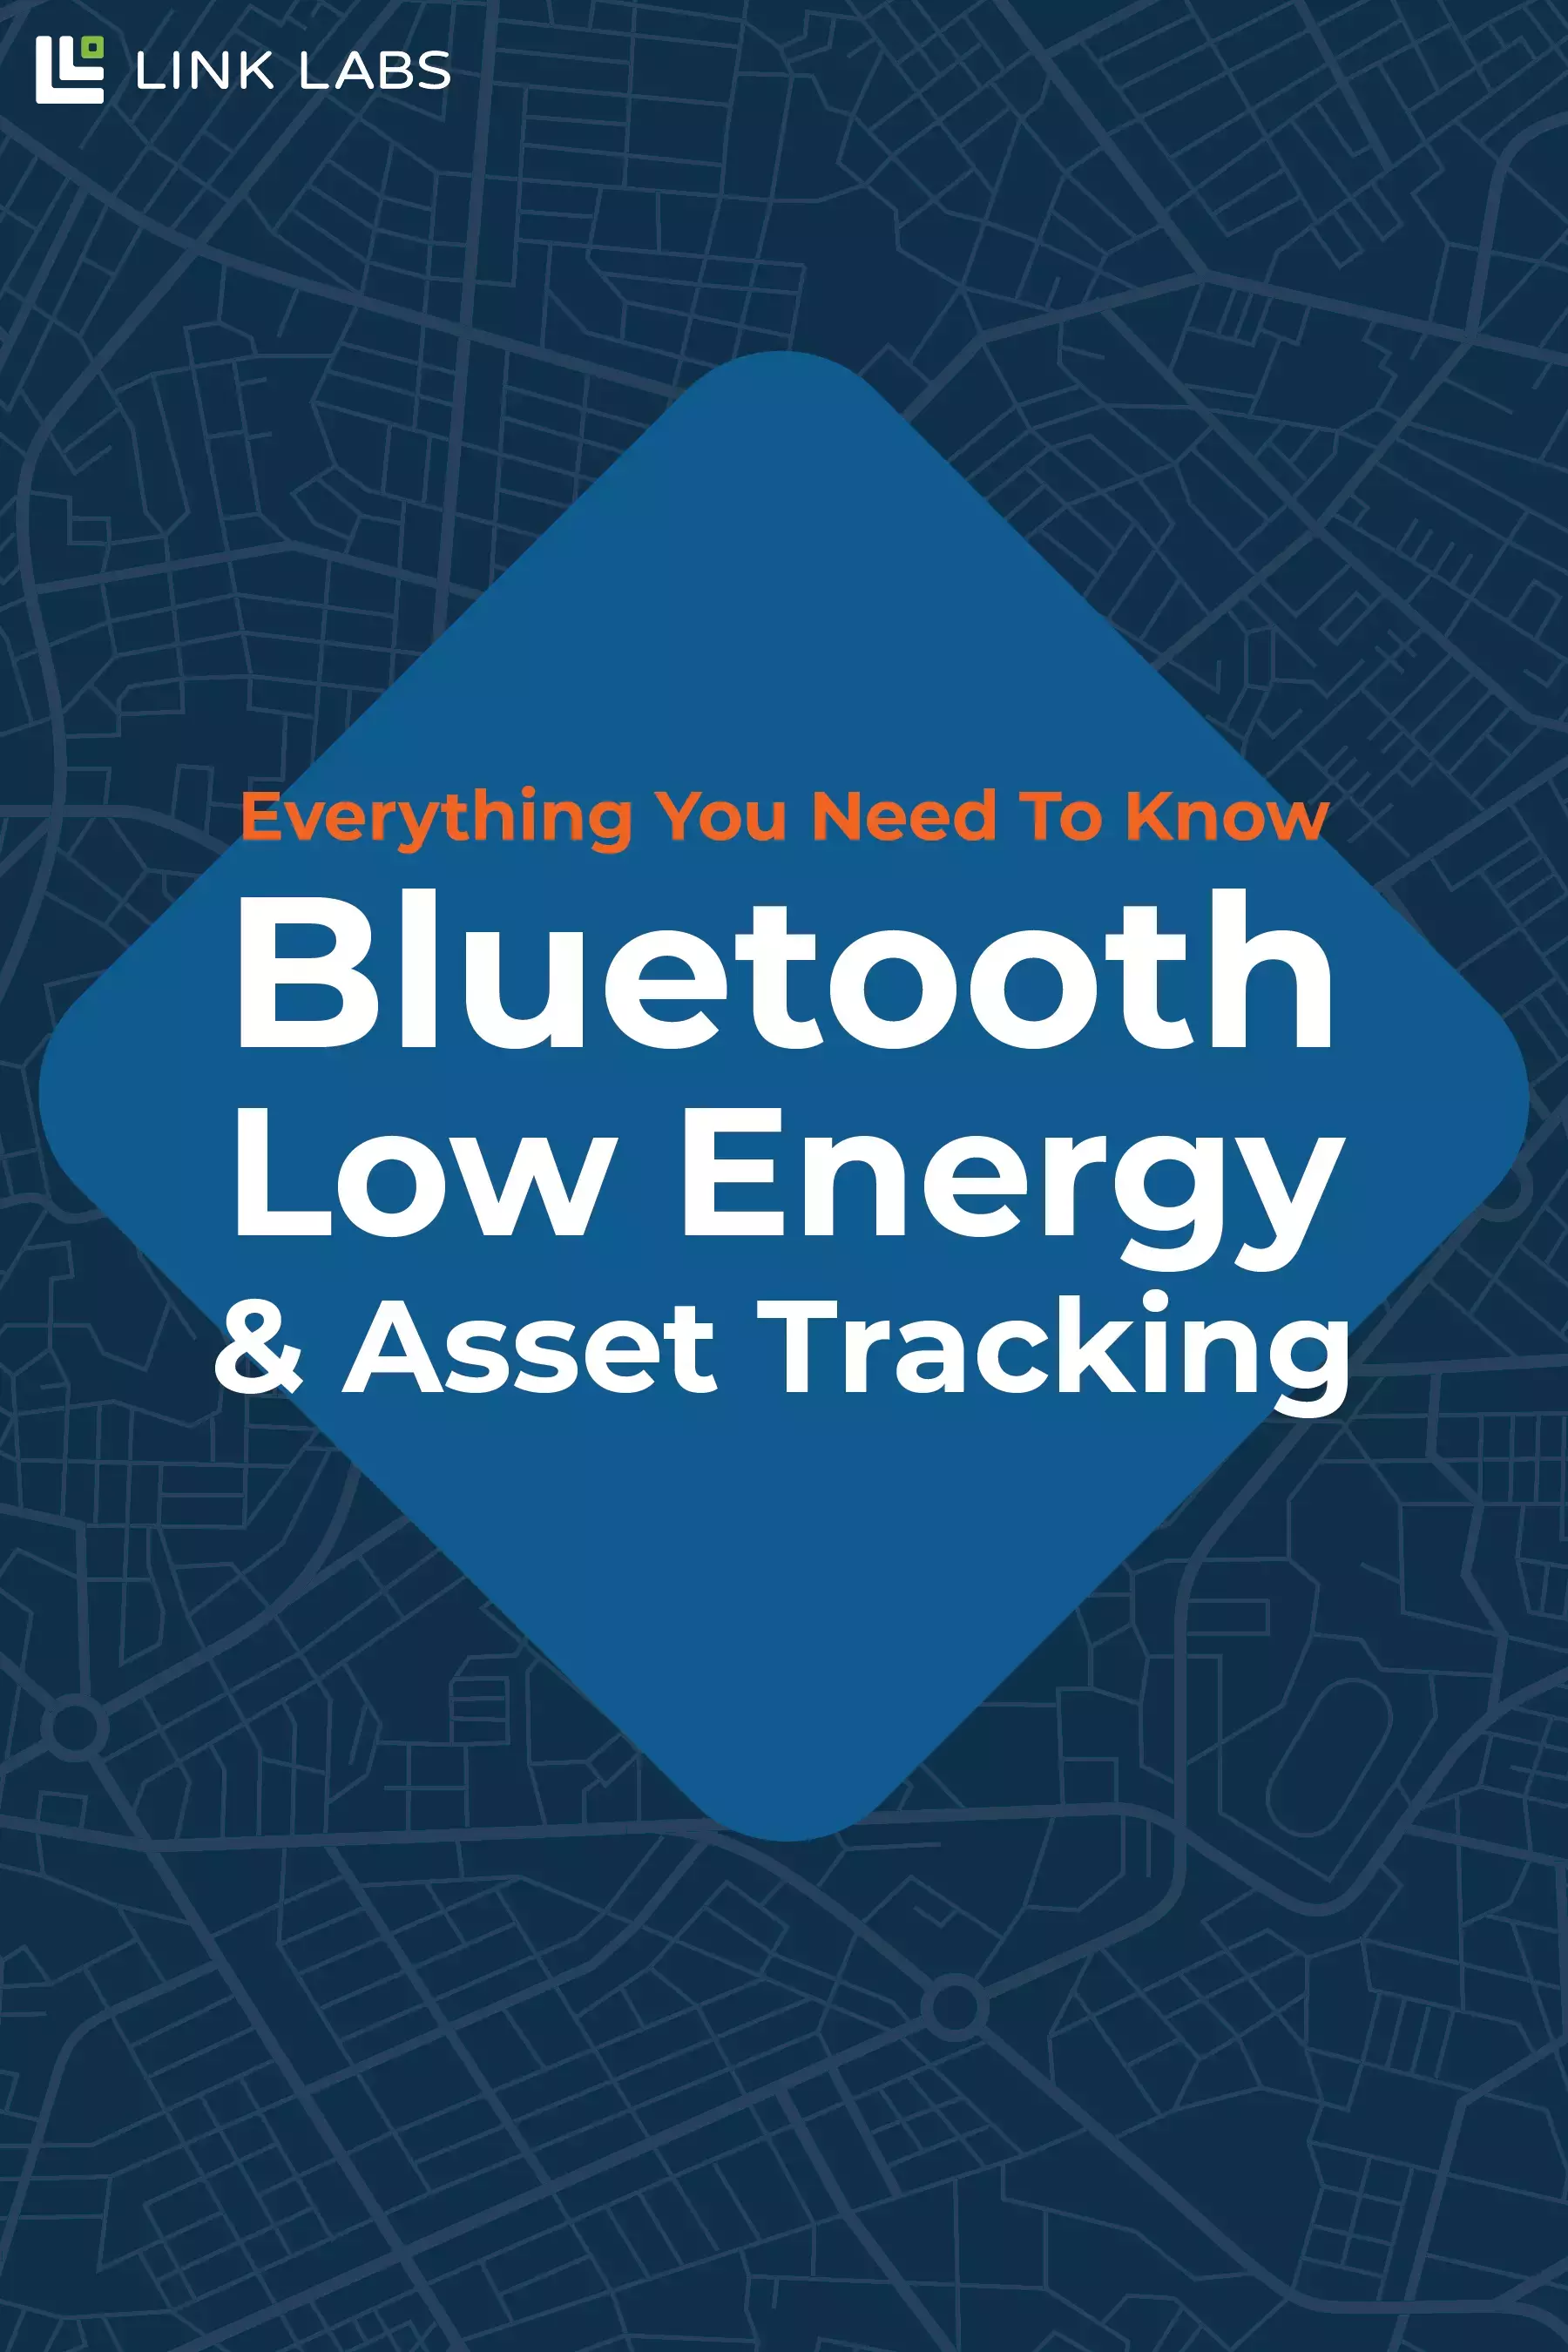 Everything You Need To Know - Bluetooth Low Energy  Asset Tracking- e-book-01